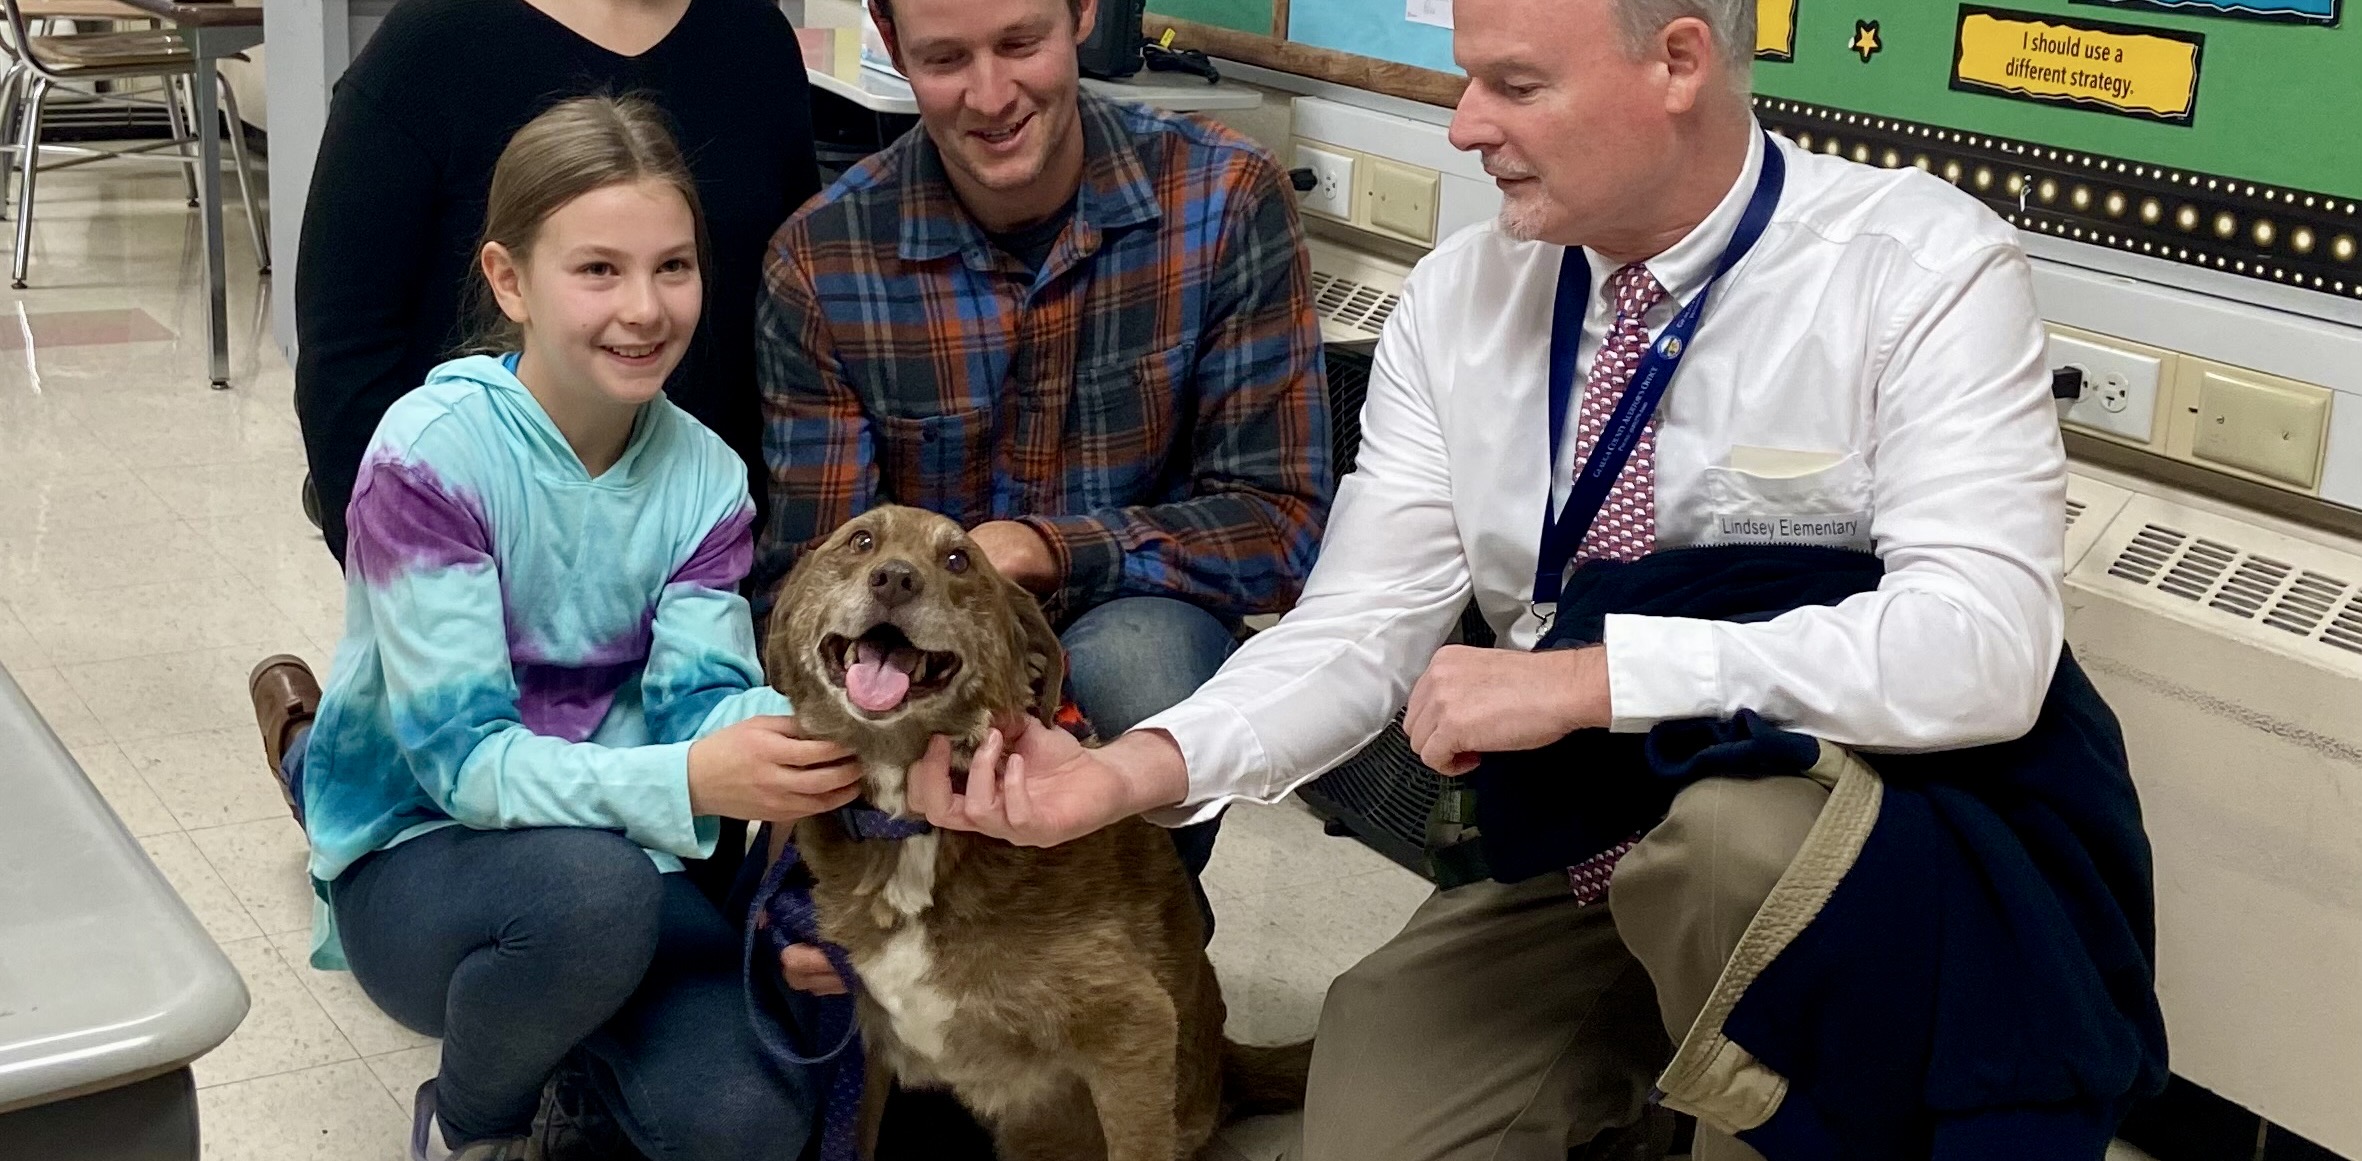 Geauga’s #1 Dog Honored at Lindsey Elementary